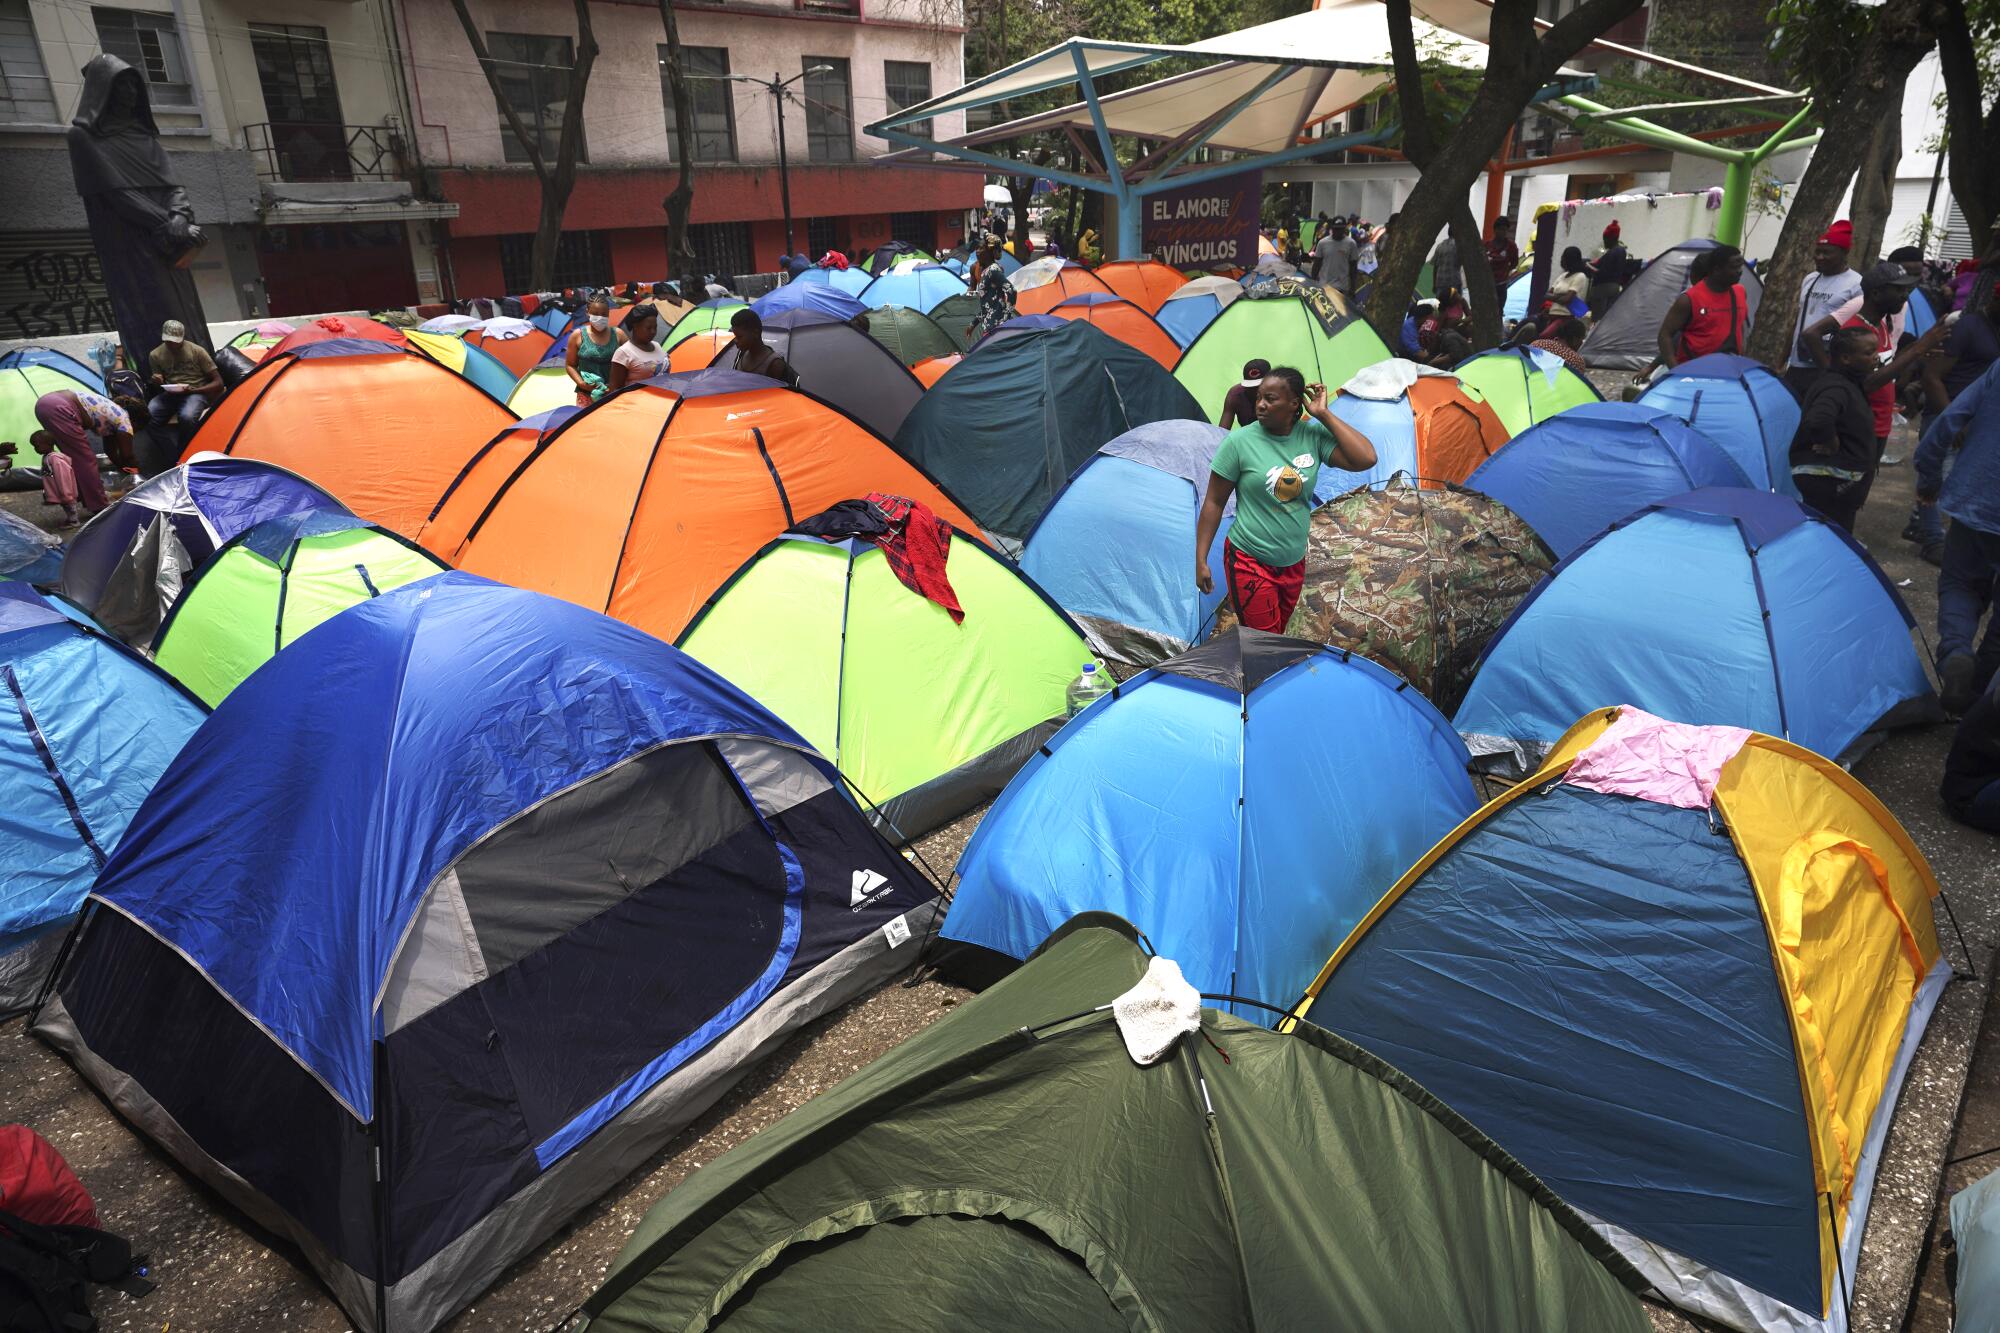 Rows of tents arrayed in a plaza 